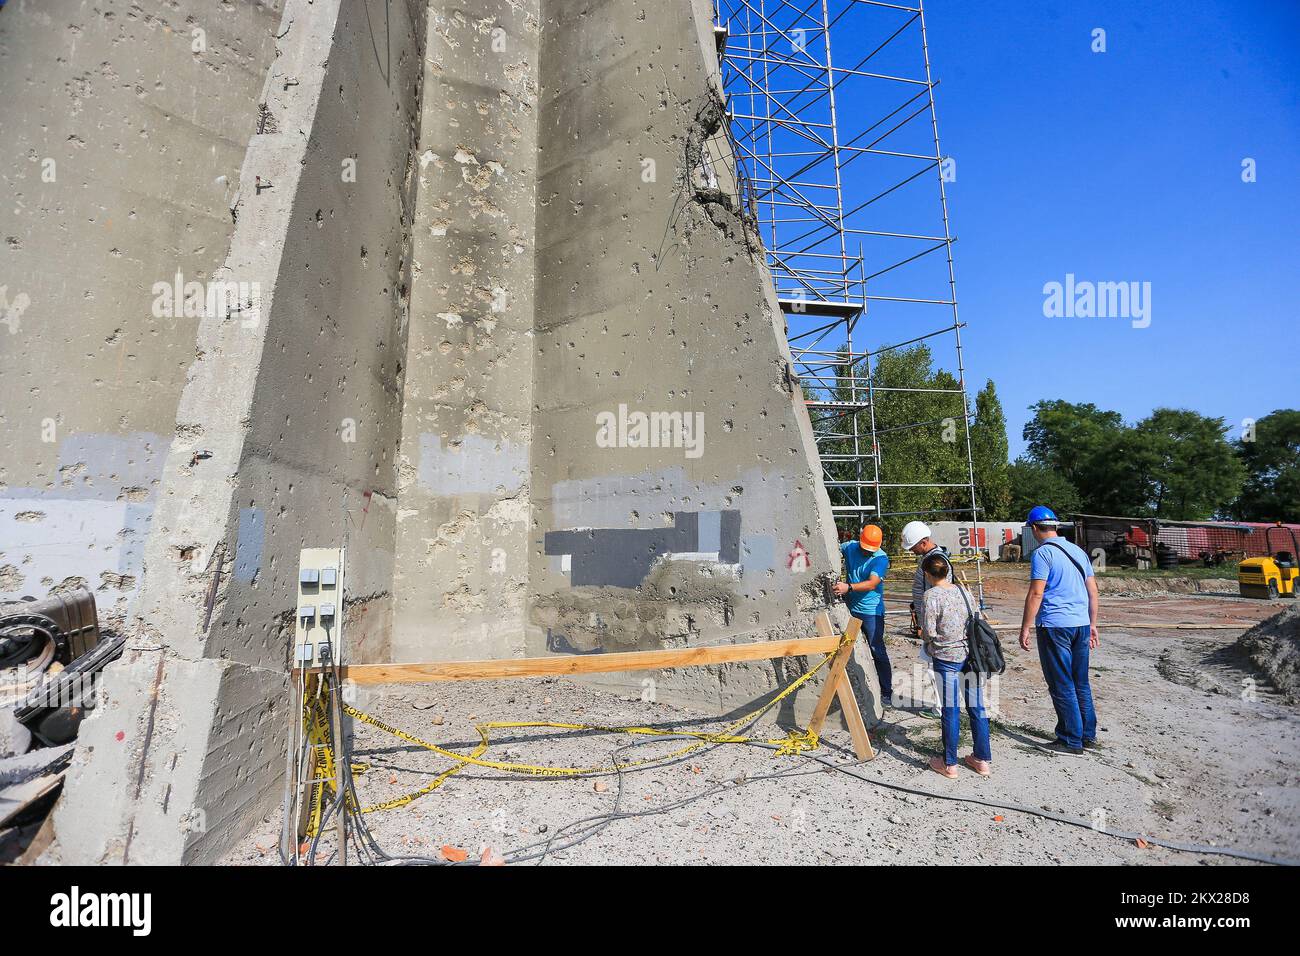 23.08.2017., Vukovar, Croatia - Reconstruction of Vukovar Water Tower which is one of symbols of resistance during the Homeland war. Photo: Davor Javorovic/PIXSELL Stock Photo